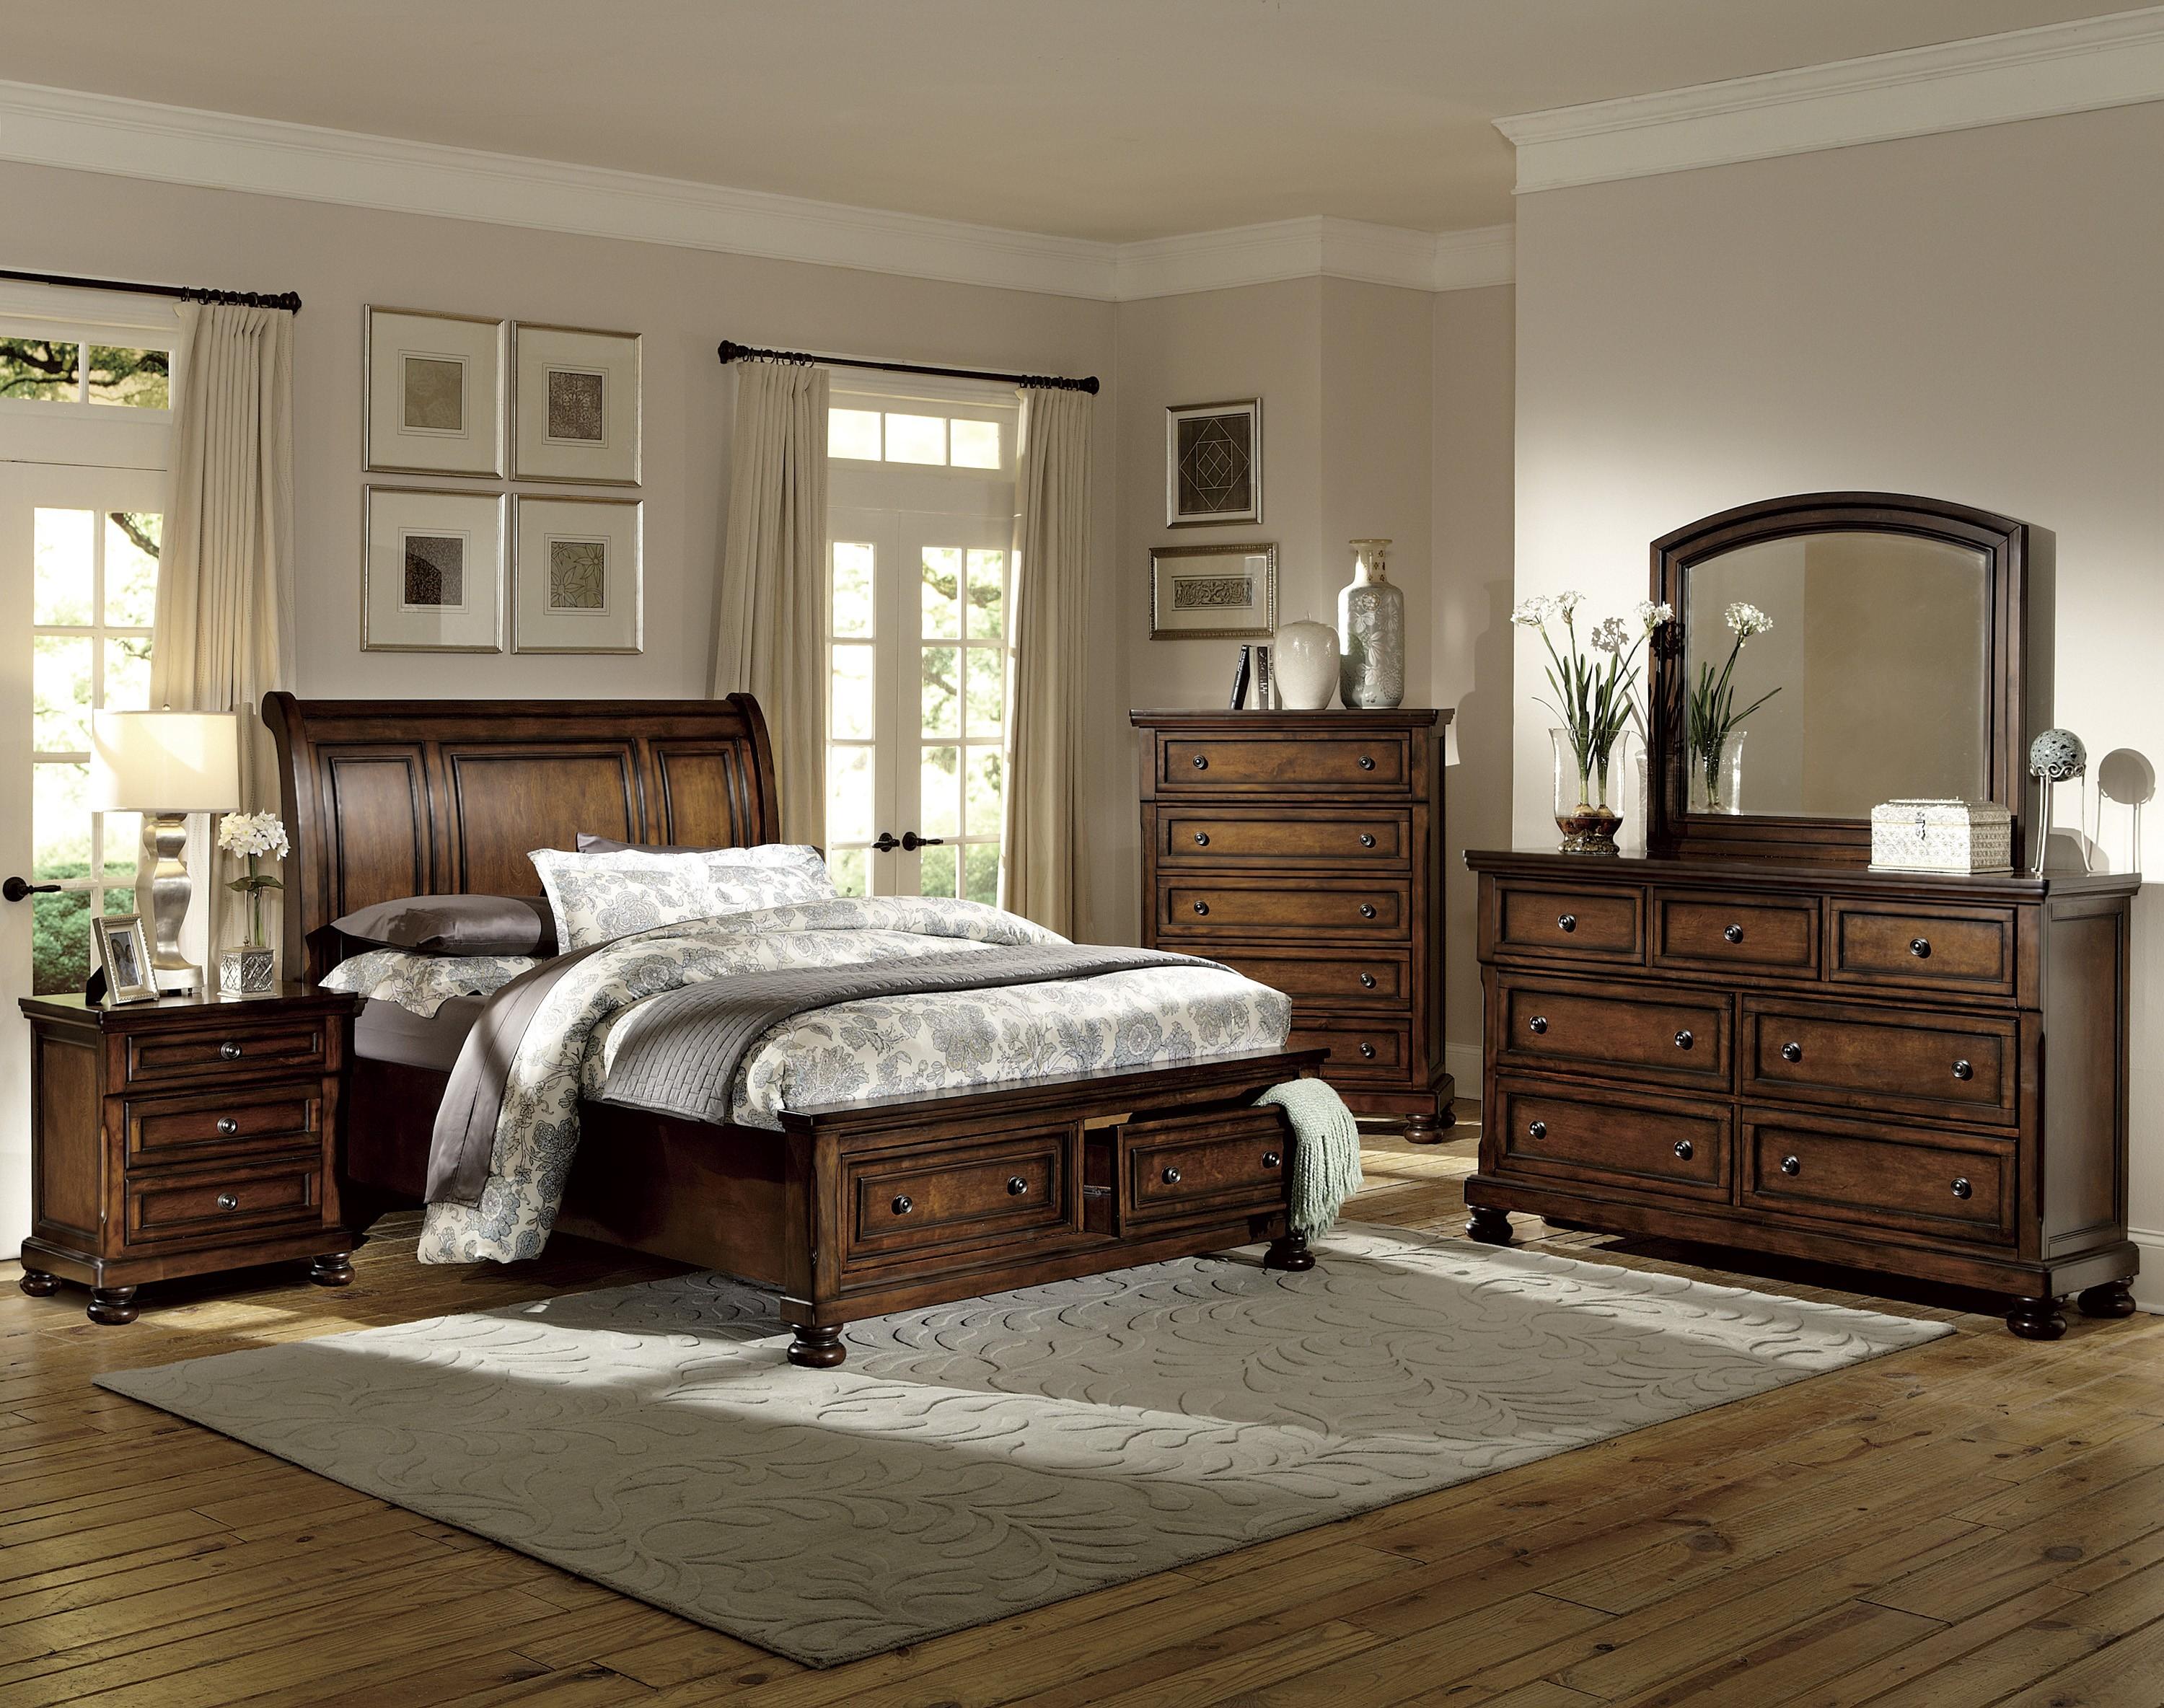 Traditional Bedroom Set 2159F-1-5PC Cumberland 2159F-1-5PC in Cherry 